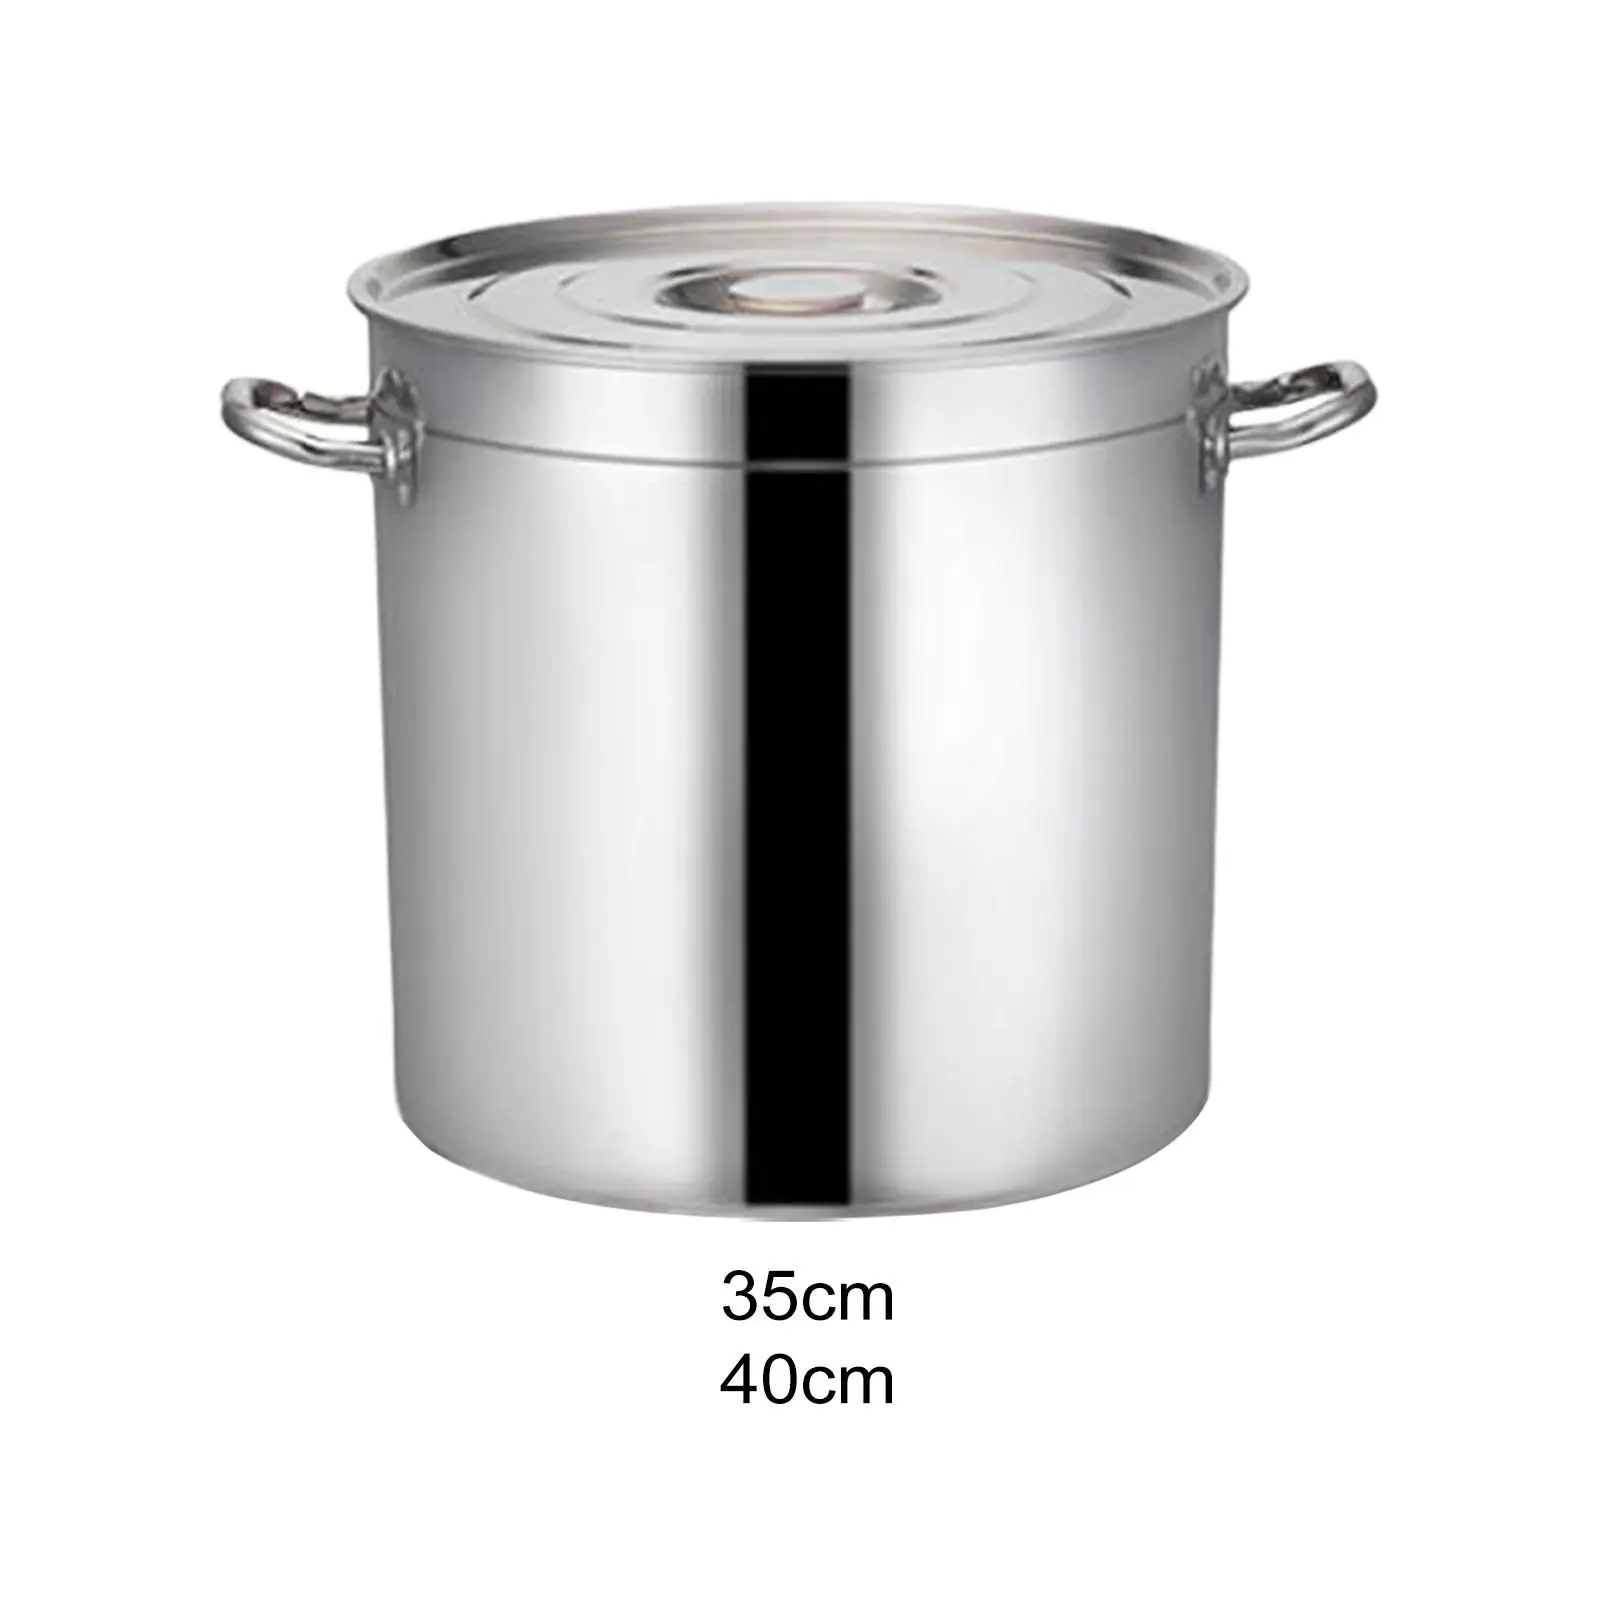 Stainless Steel Cookware Stockpot with Lid Multifunctional for Commercial